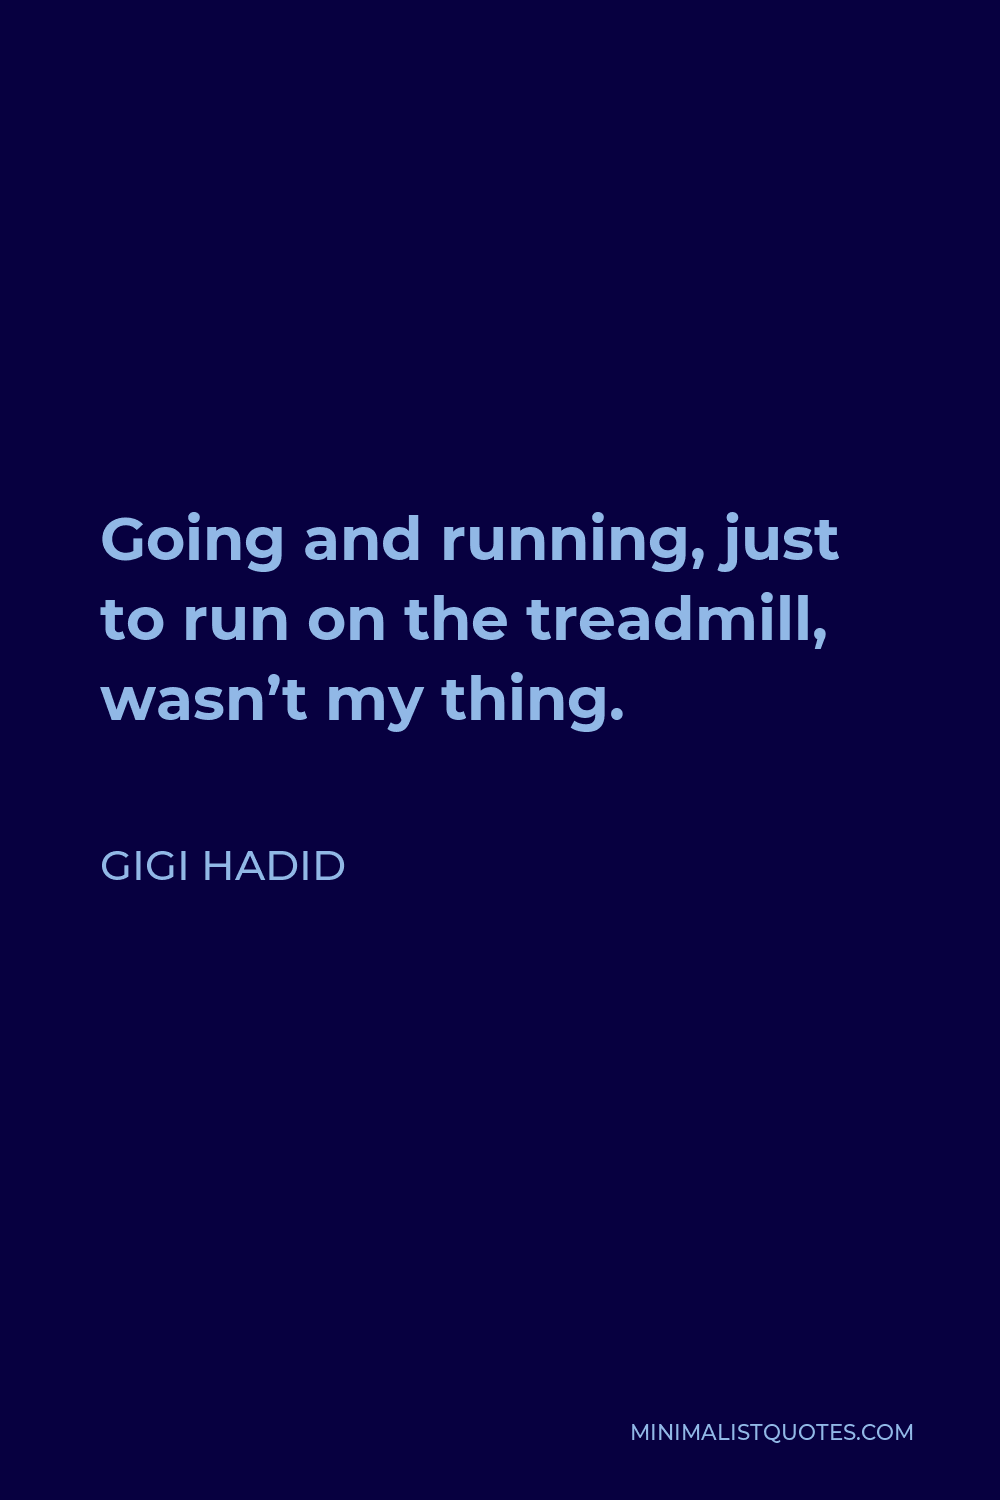 Gigi Hadid Quote - Going and running, just to run on the treadmill, wasn’t my thing.